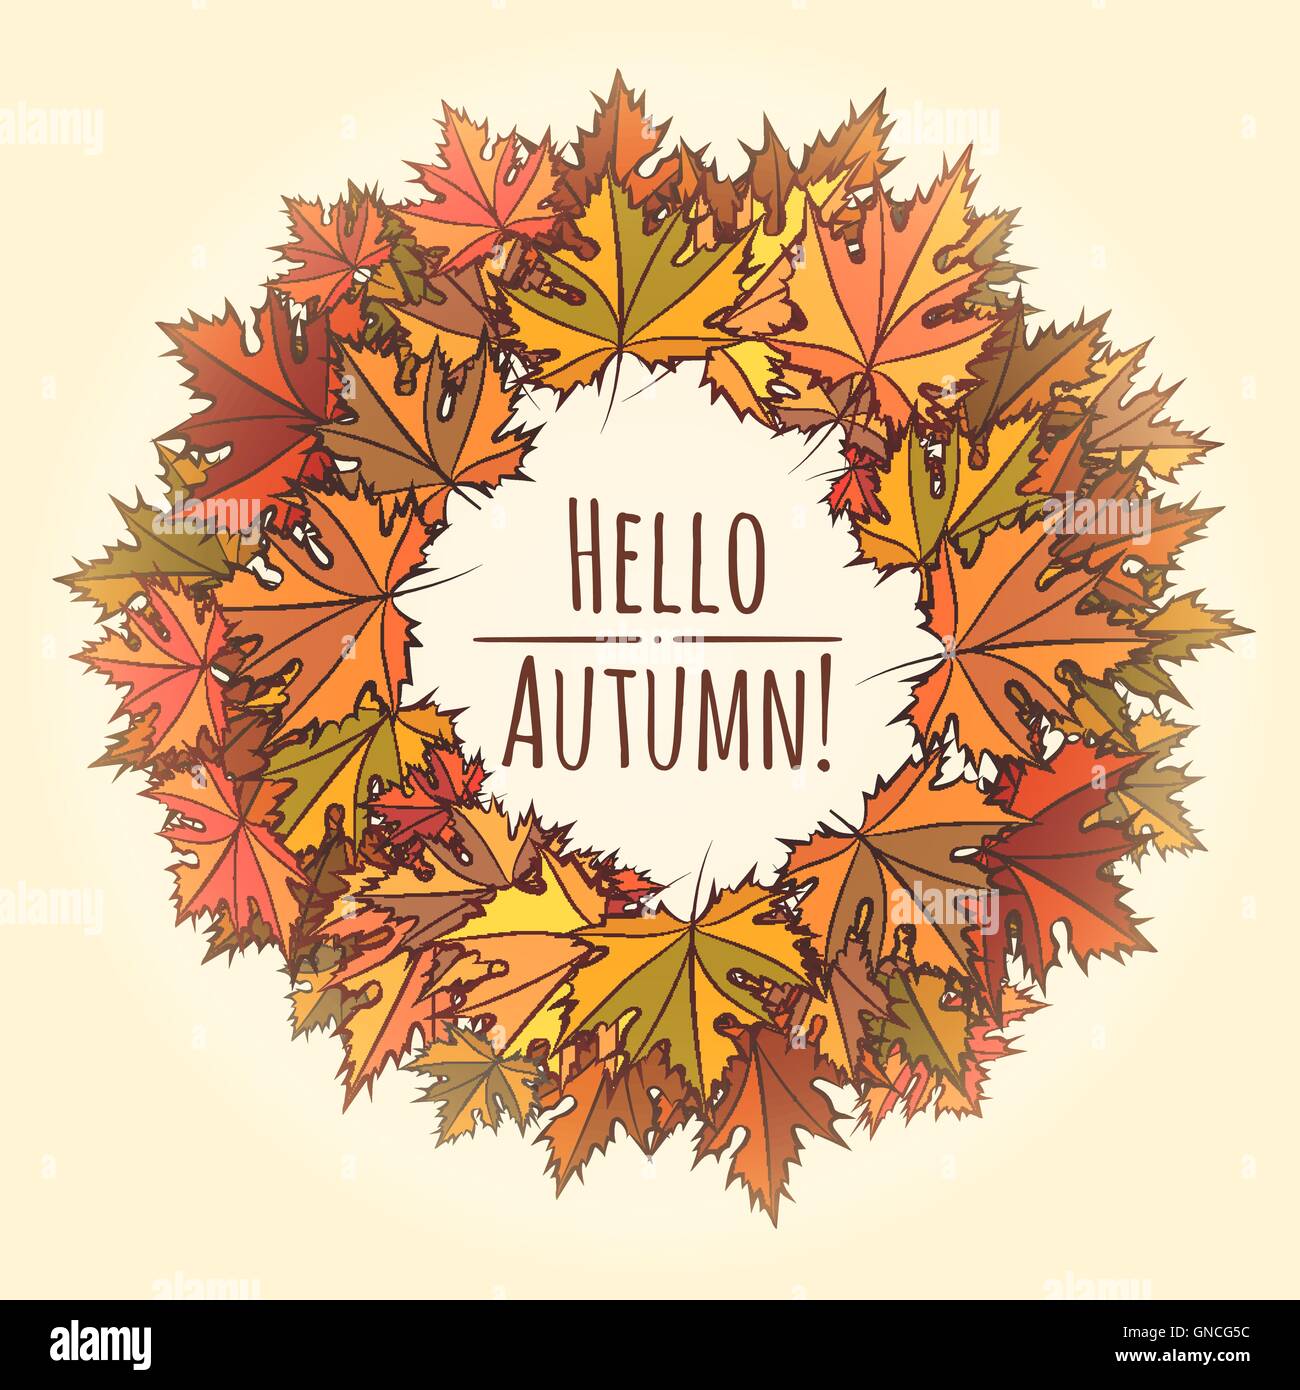 Autumn round frame with hand drawn leaves and wording Hello Autumn. Stock Vector